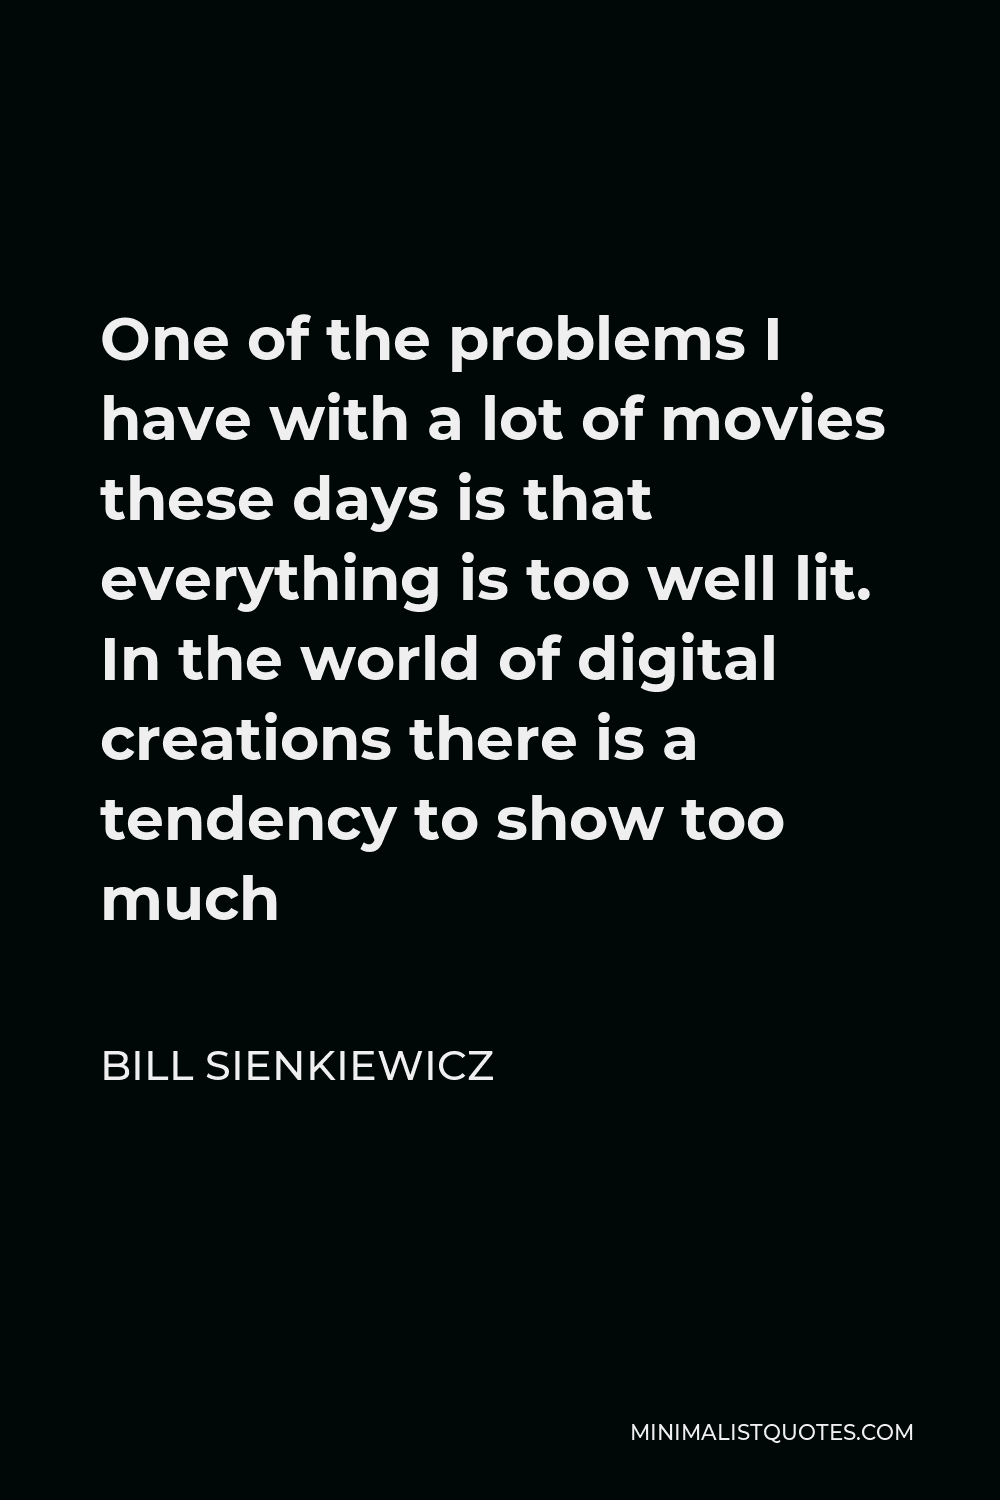 Bill Sienkiewicz Quote - One of the problems I have with a lot of movies these days is that everything is too well lit. In the world of digital creations there is a tendency to show too much